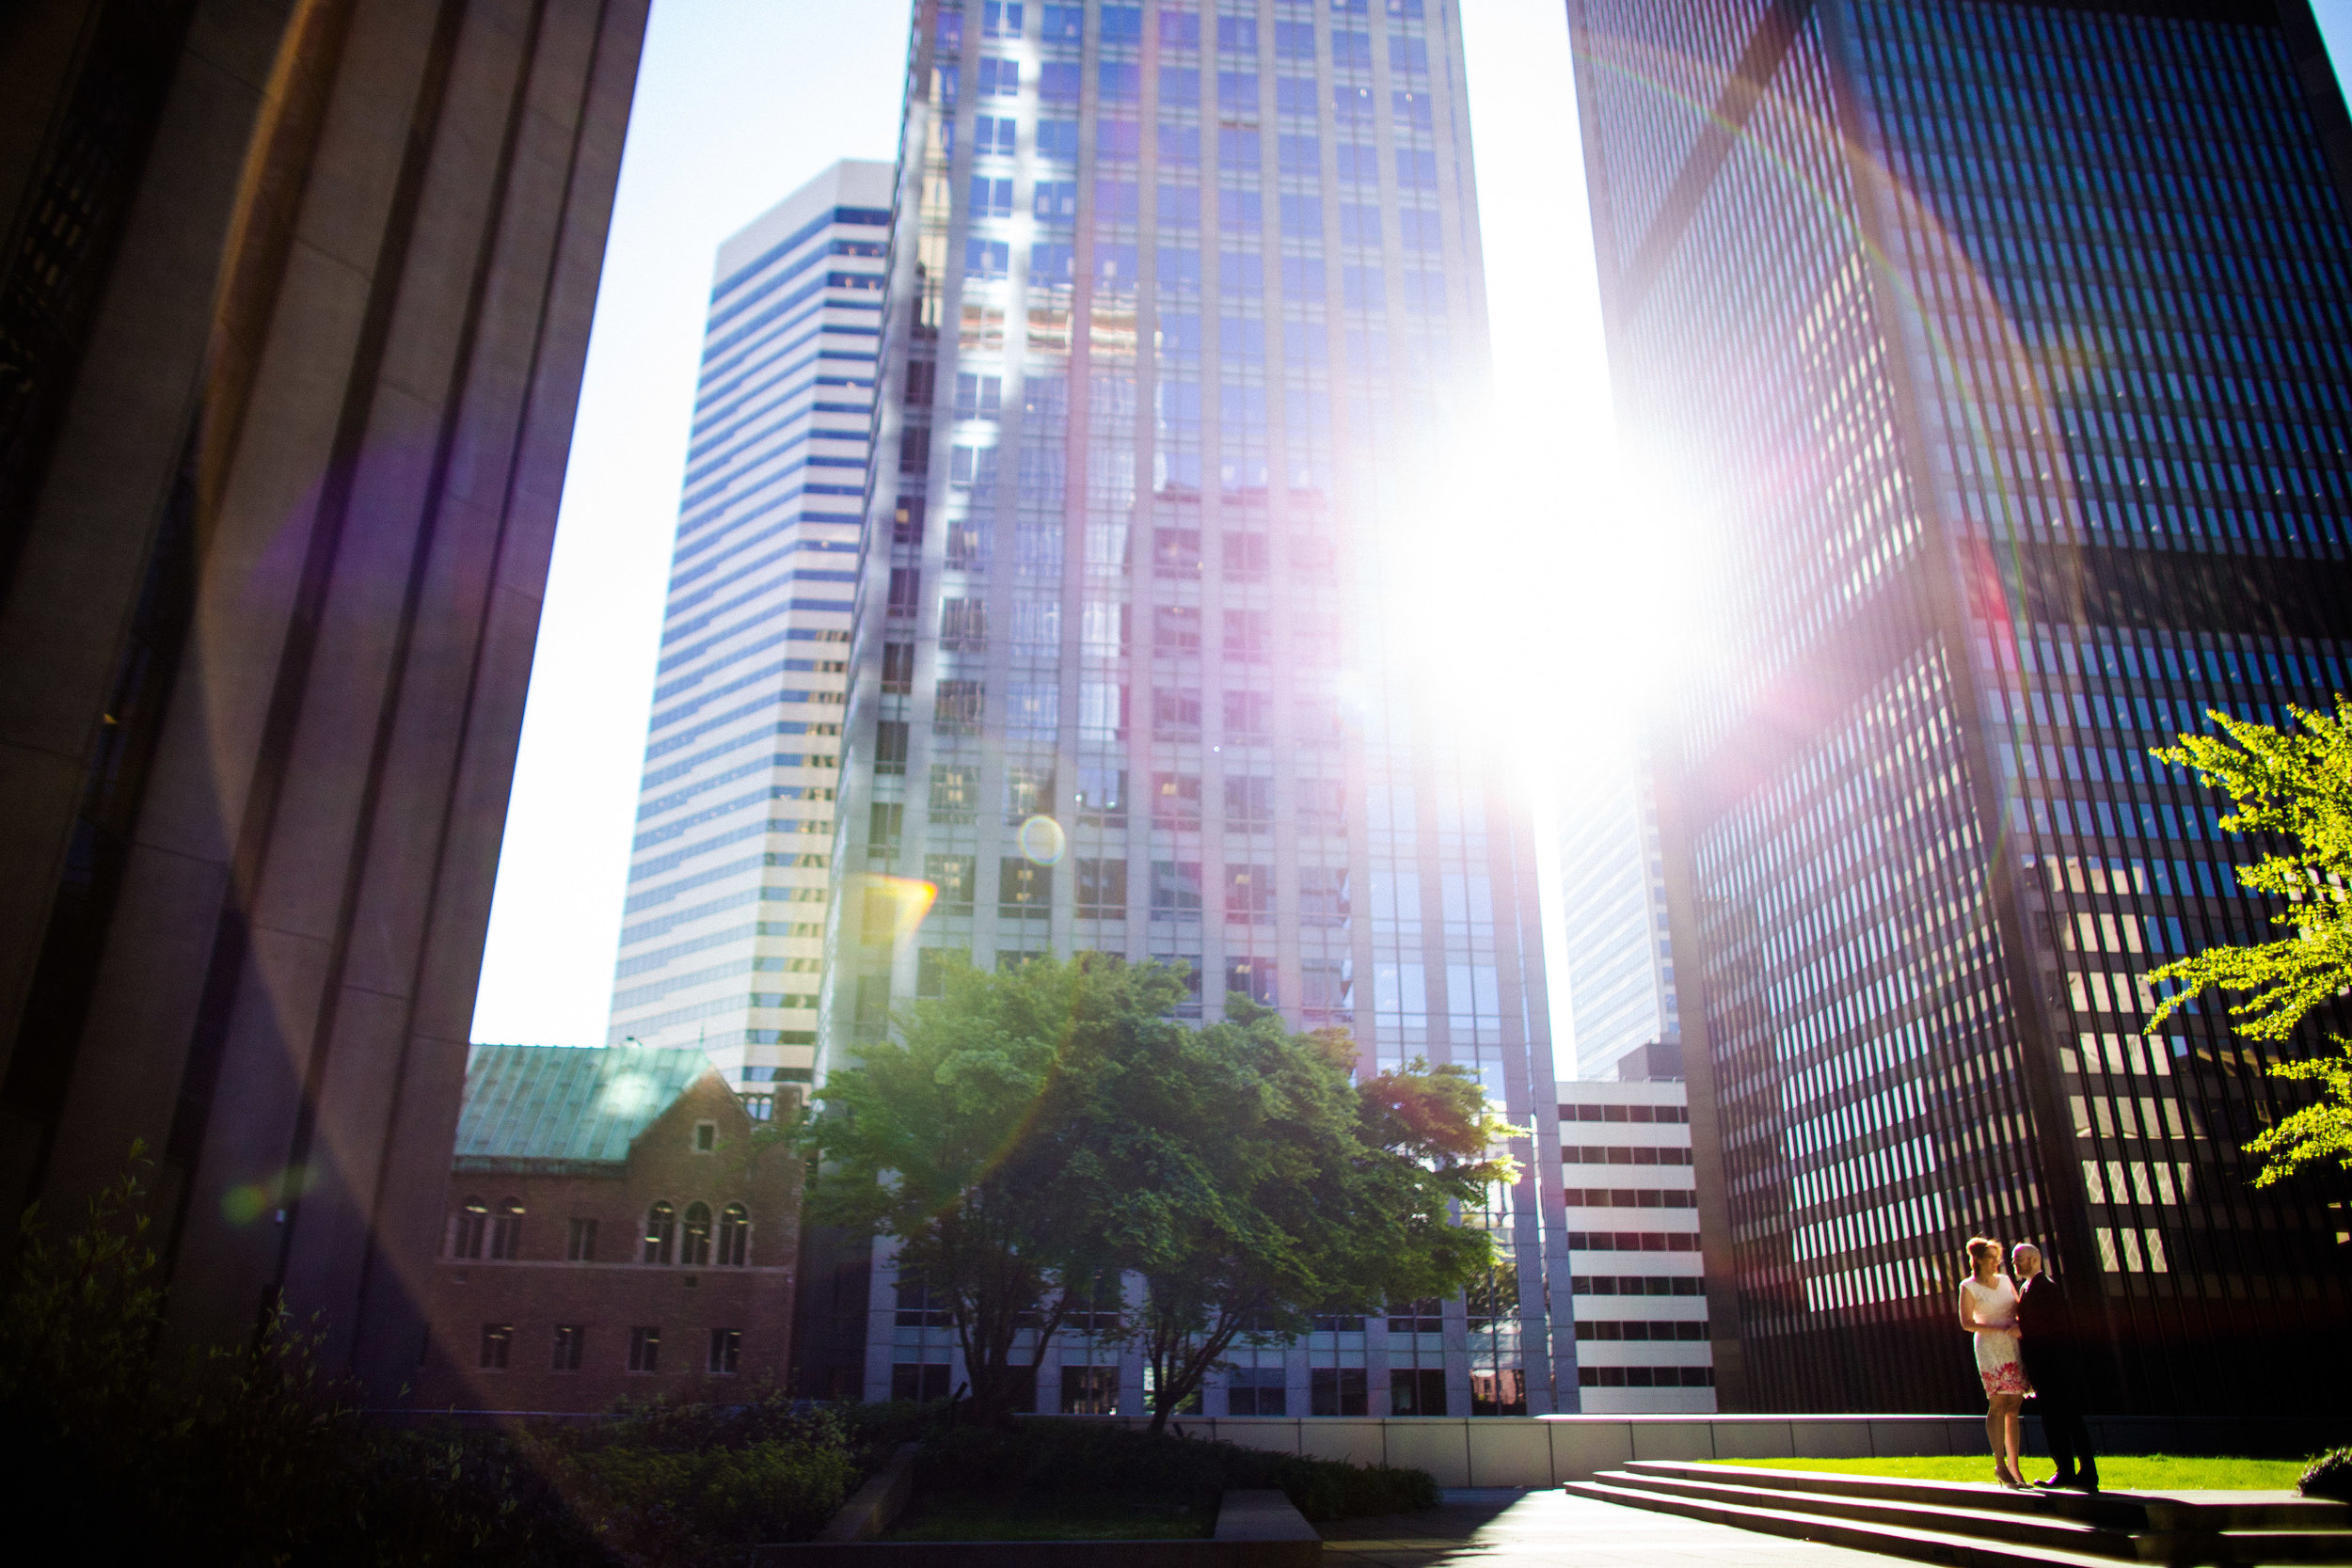 Wedding photography with Sun flare in Seattle